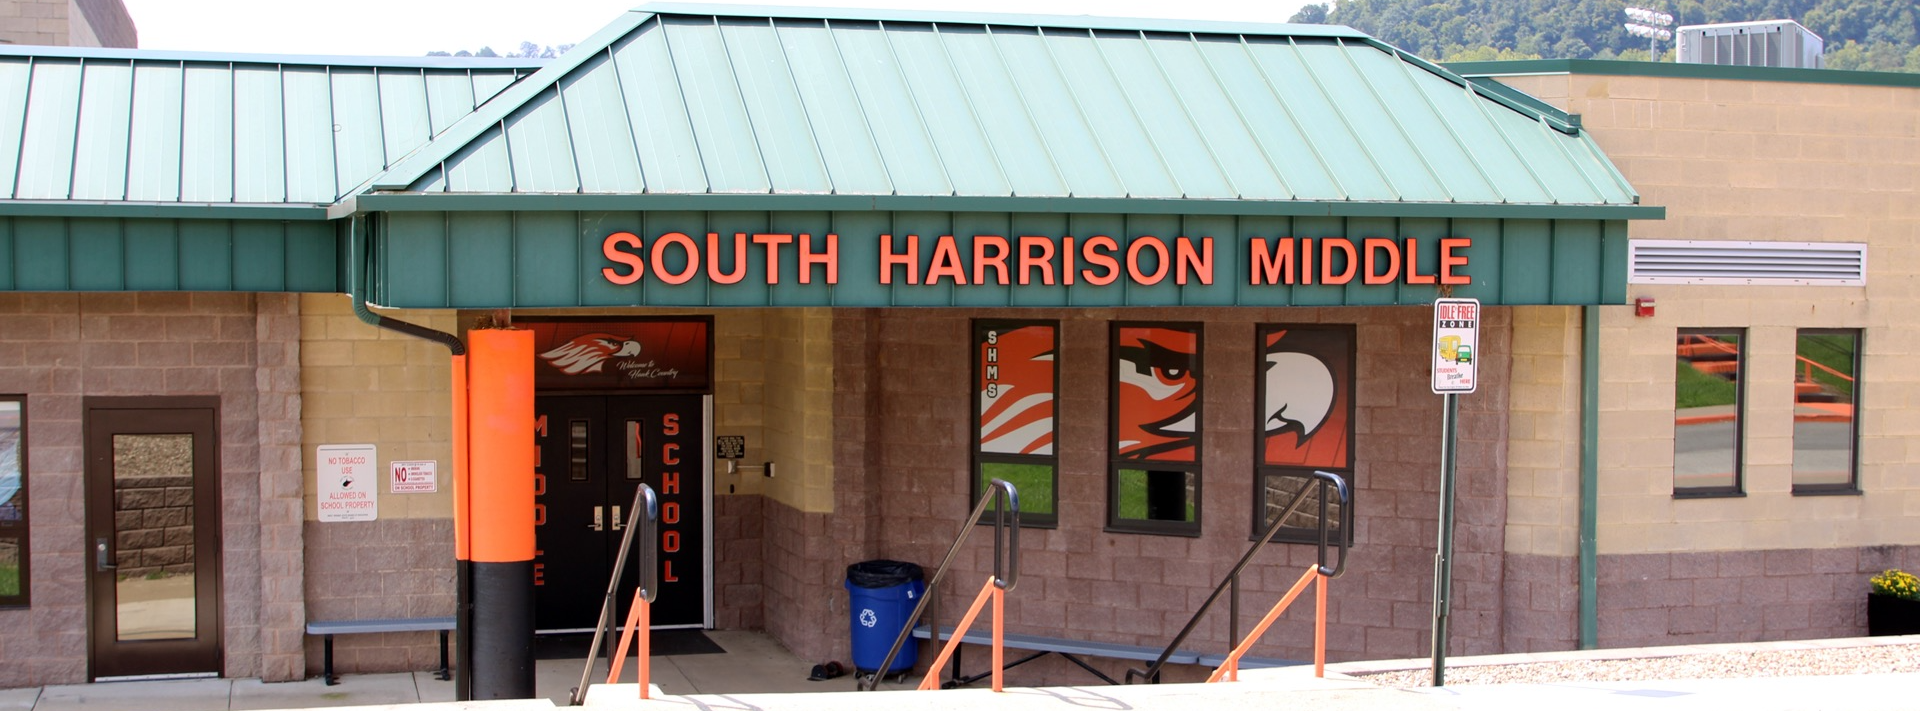 South Harrison Middle Front Picture